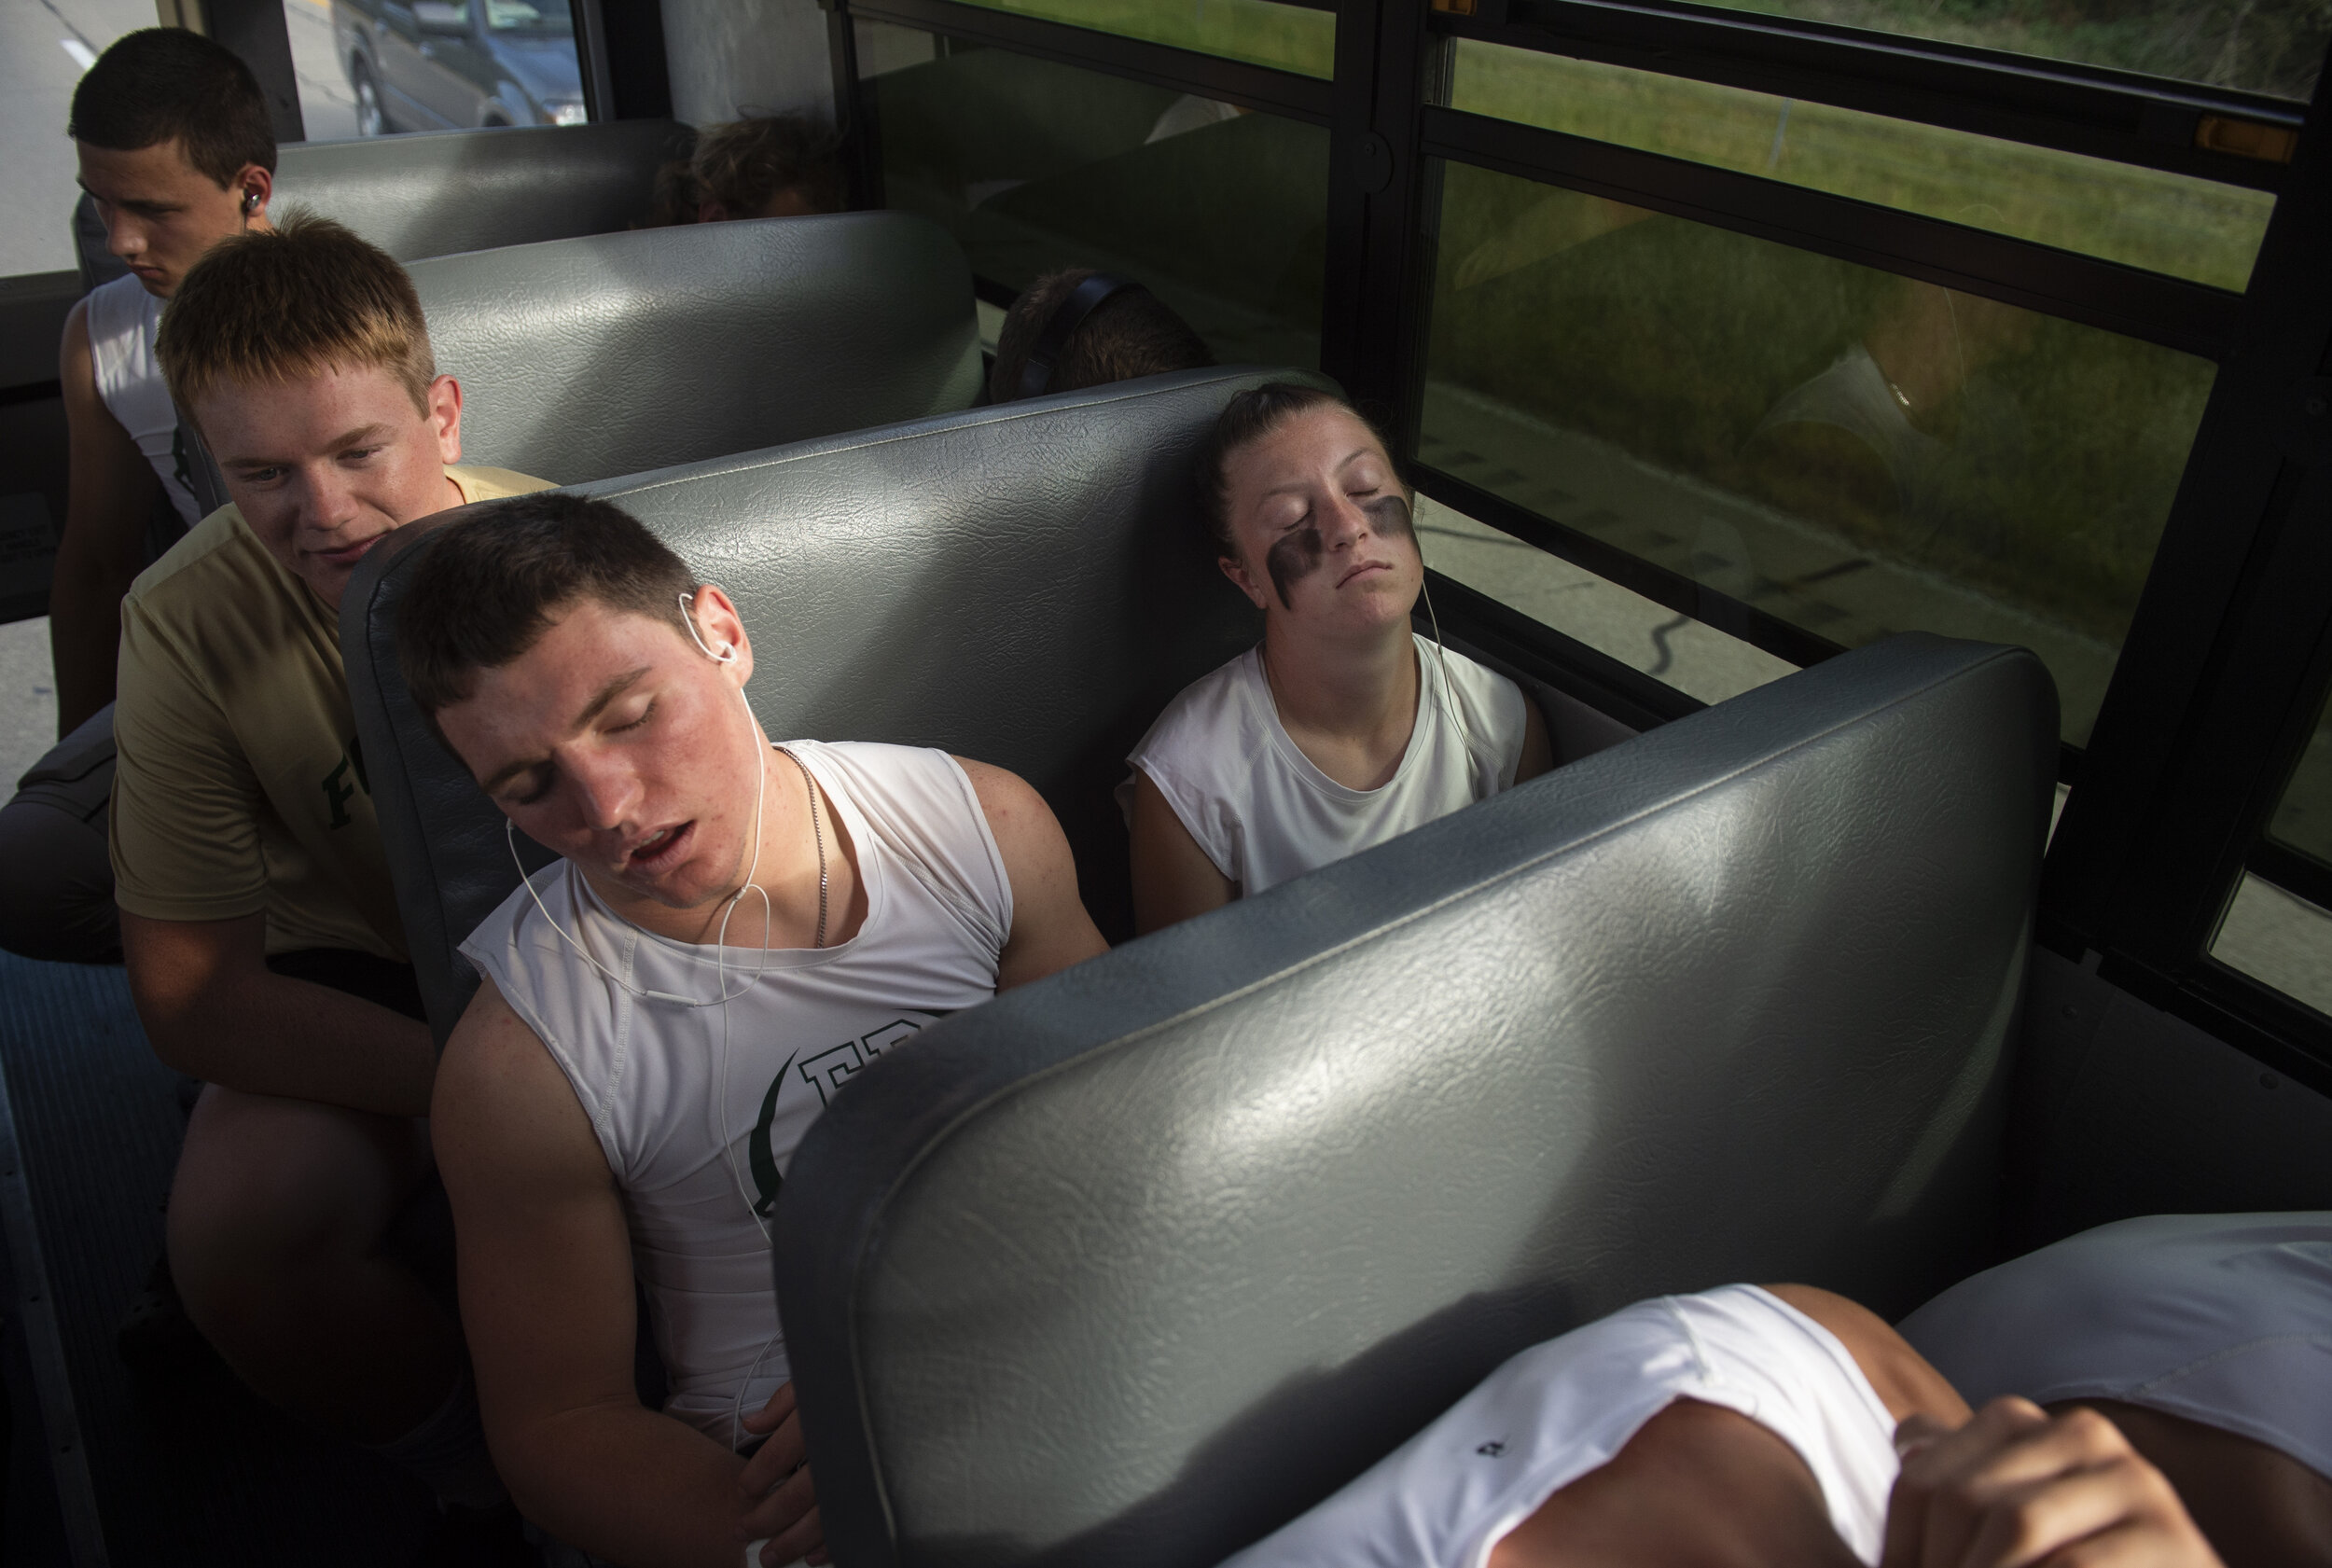  Forest Park Seniors Gavin Knust, left, and Abby Eckert, right, rest up on the way to a football game at North Posey High School in Poseyville, Ind., Friday, Sept. 27, 2019. "I just see myself as one of the guys out there," said Eckert, the third fem